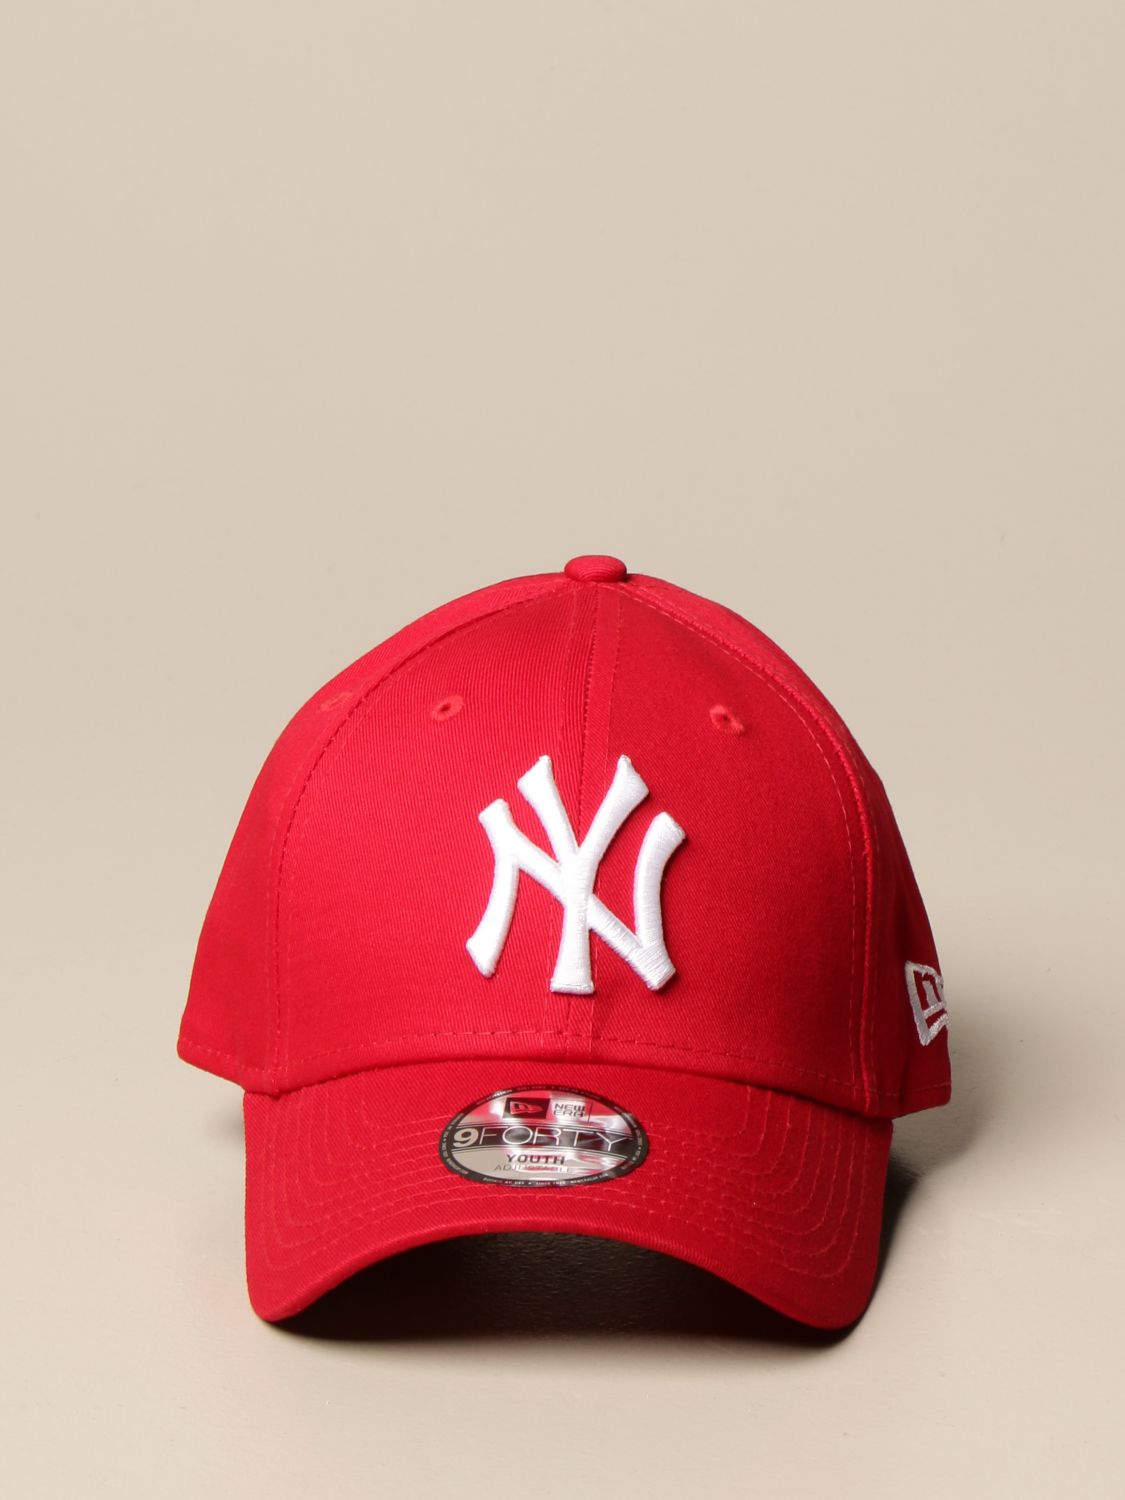 NEW ERA YOUTH: hat for kids - Red | New Era Youth hat 10877282 online ...